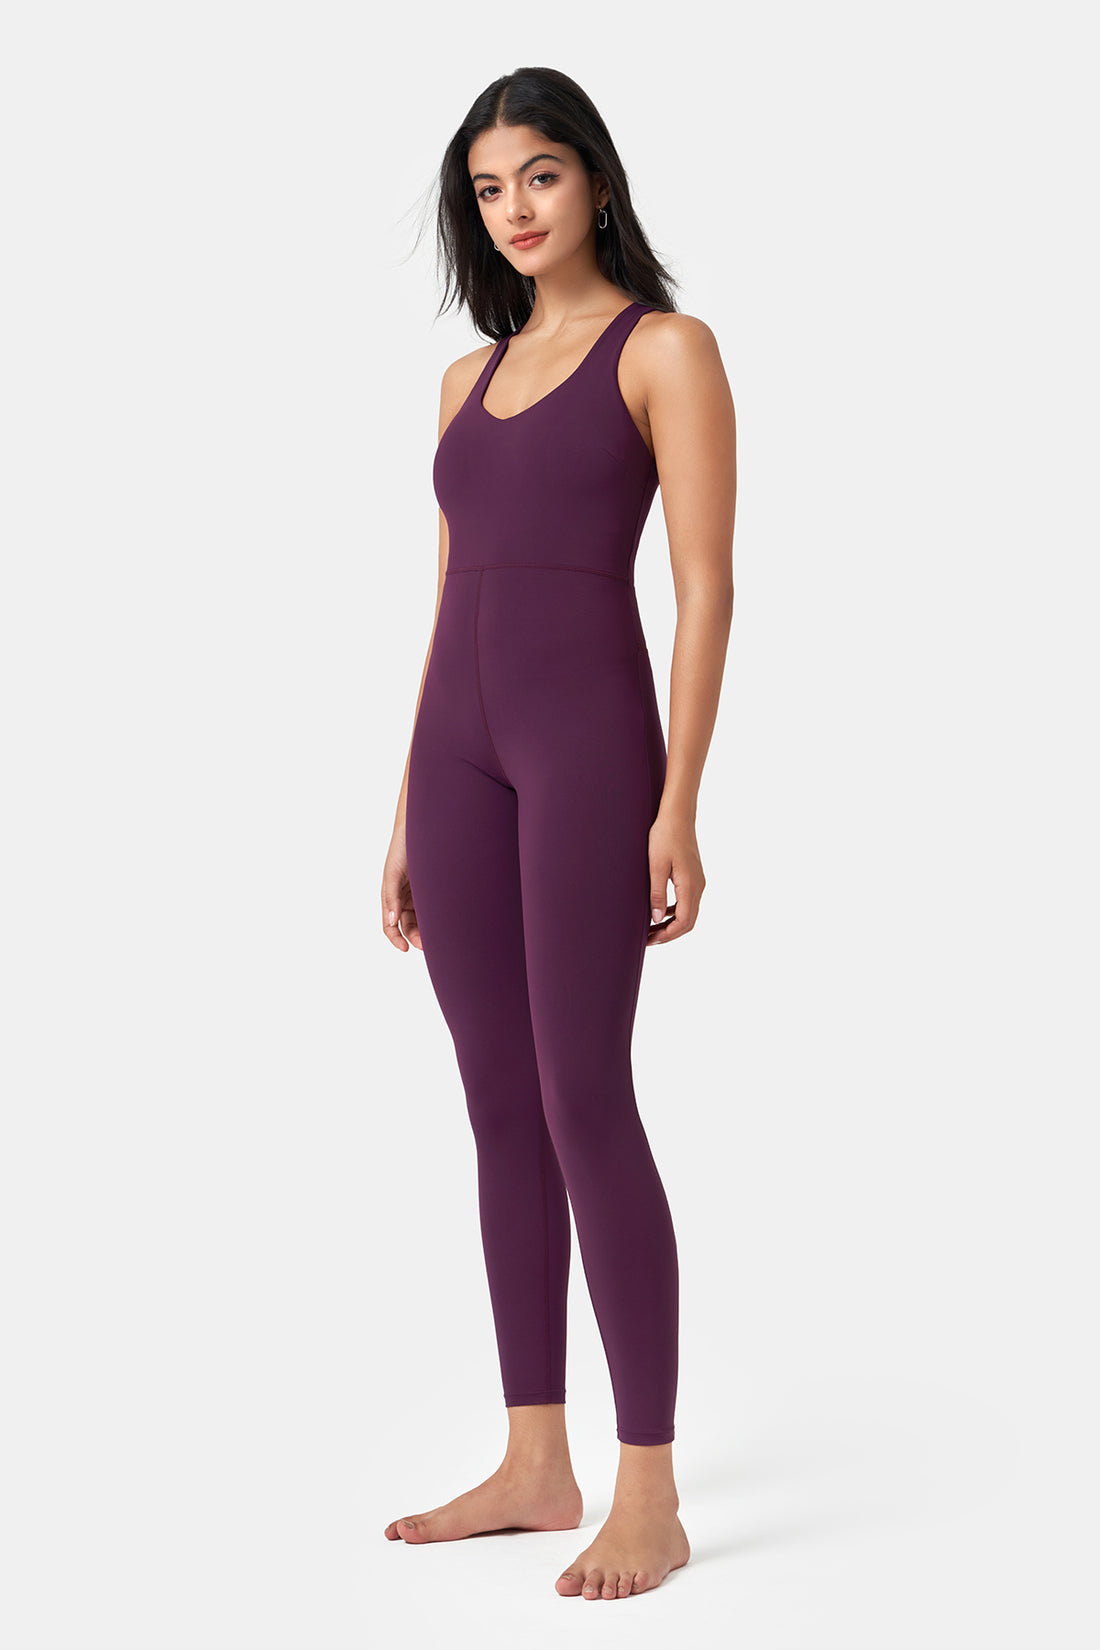 Form-Fitting Cross-Back Jumpsuit with Full-Length Pants